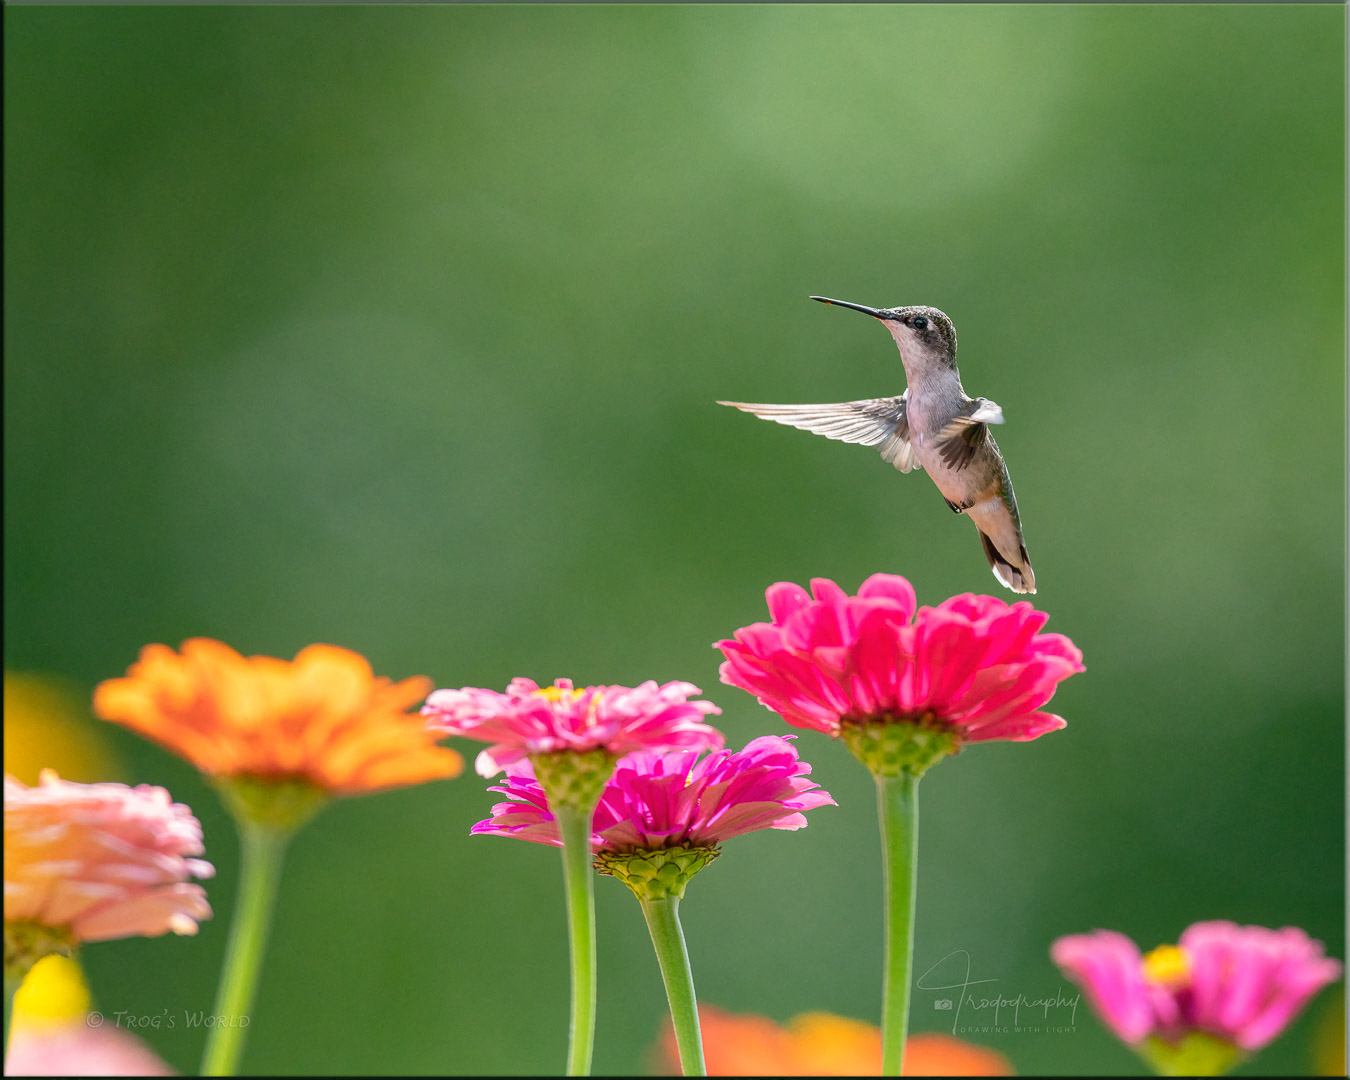 Hummingbird hovering above the flowers